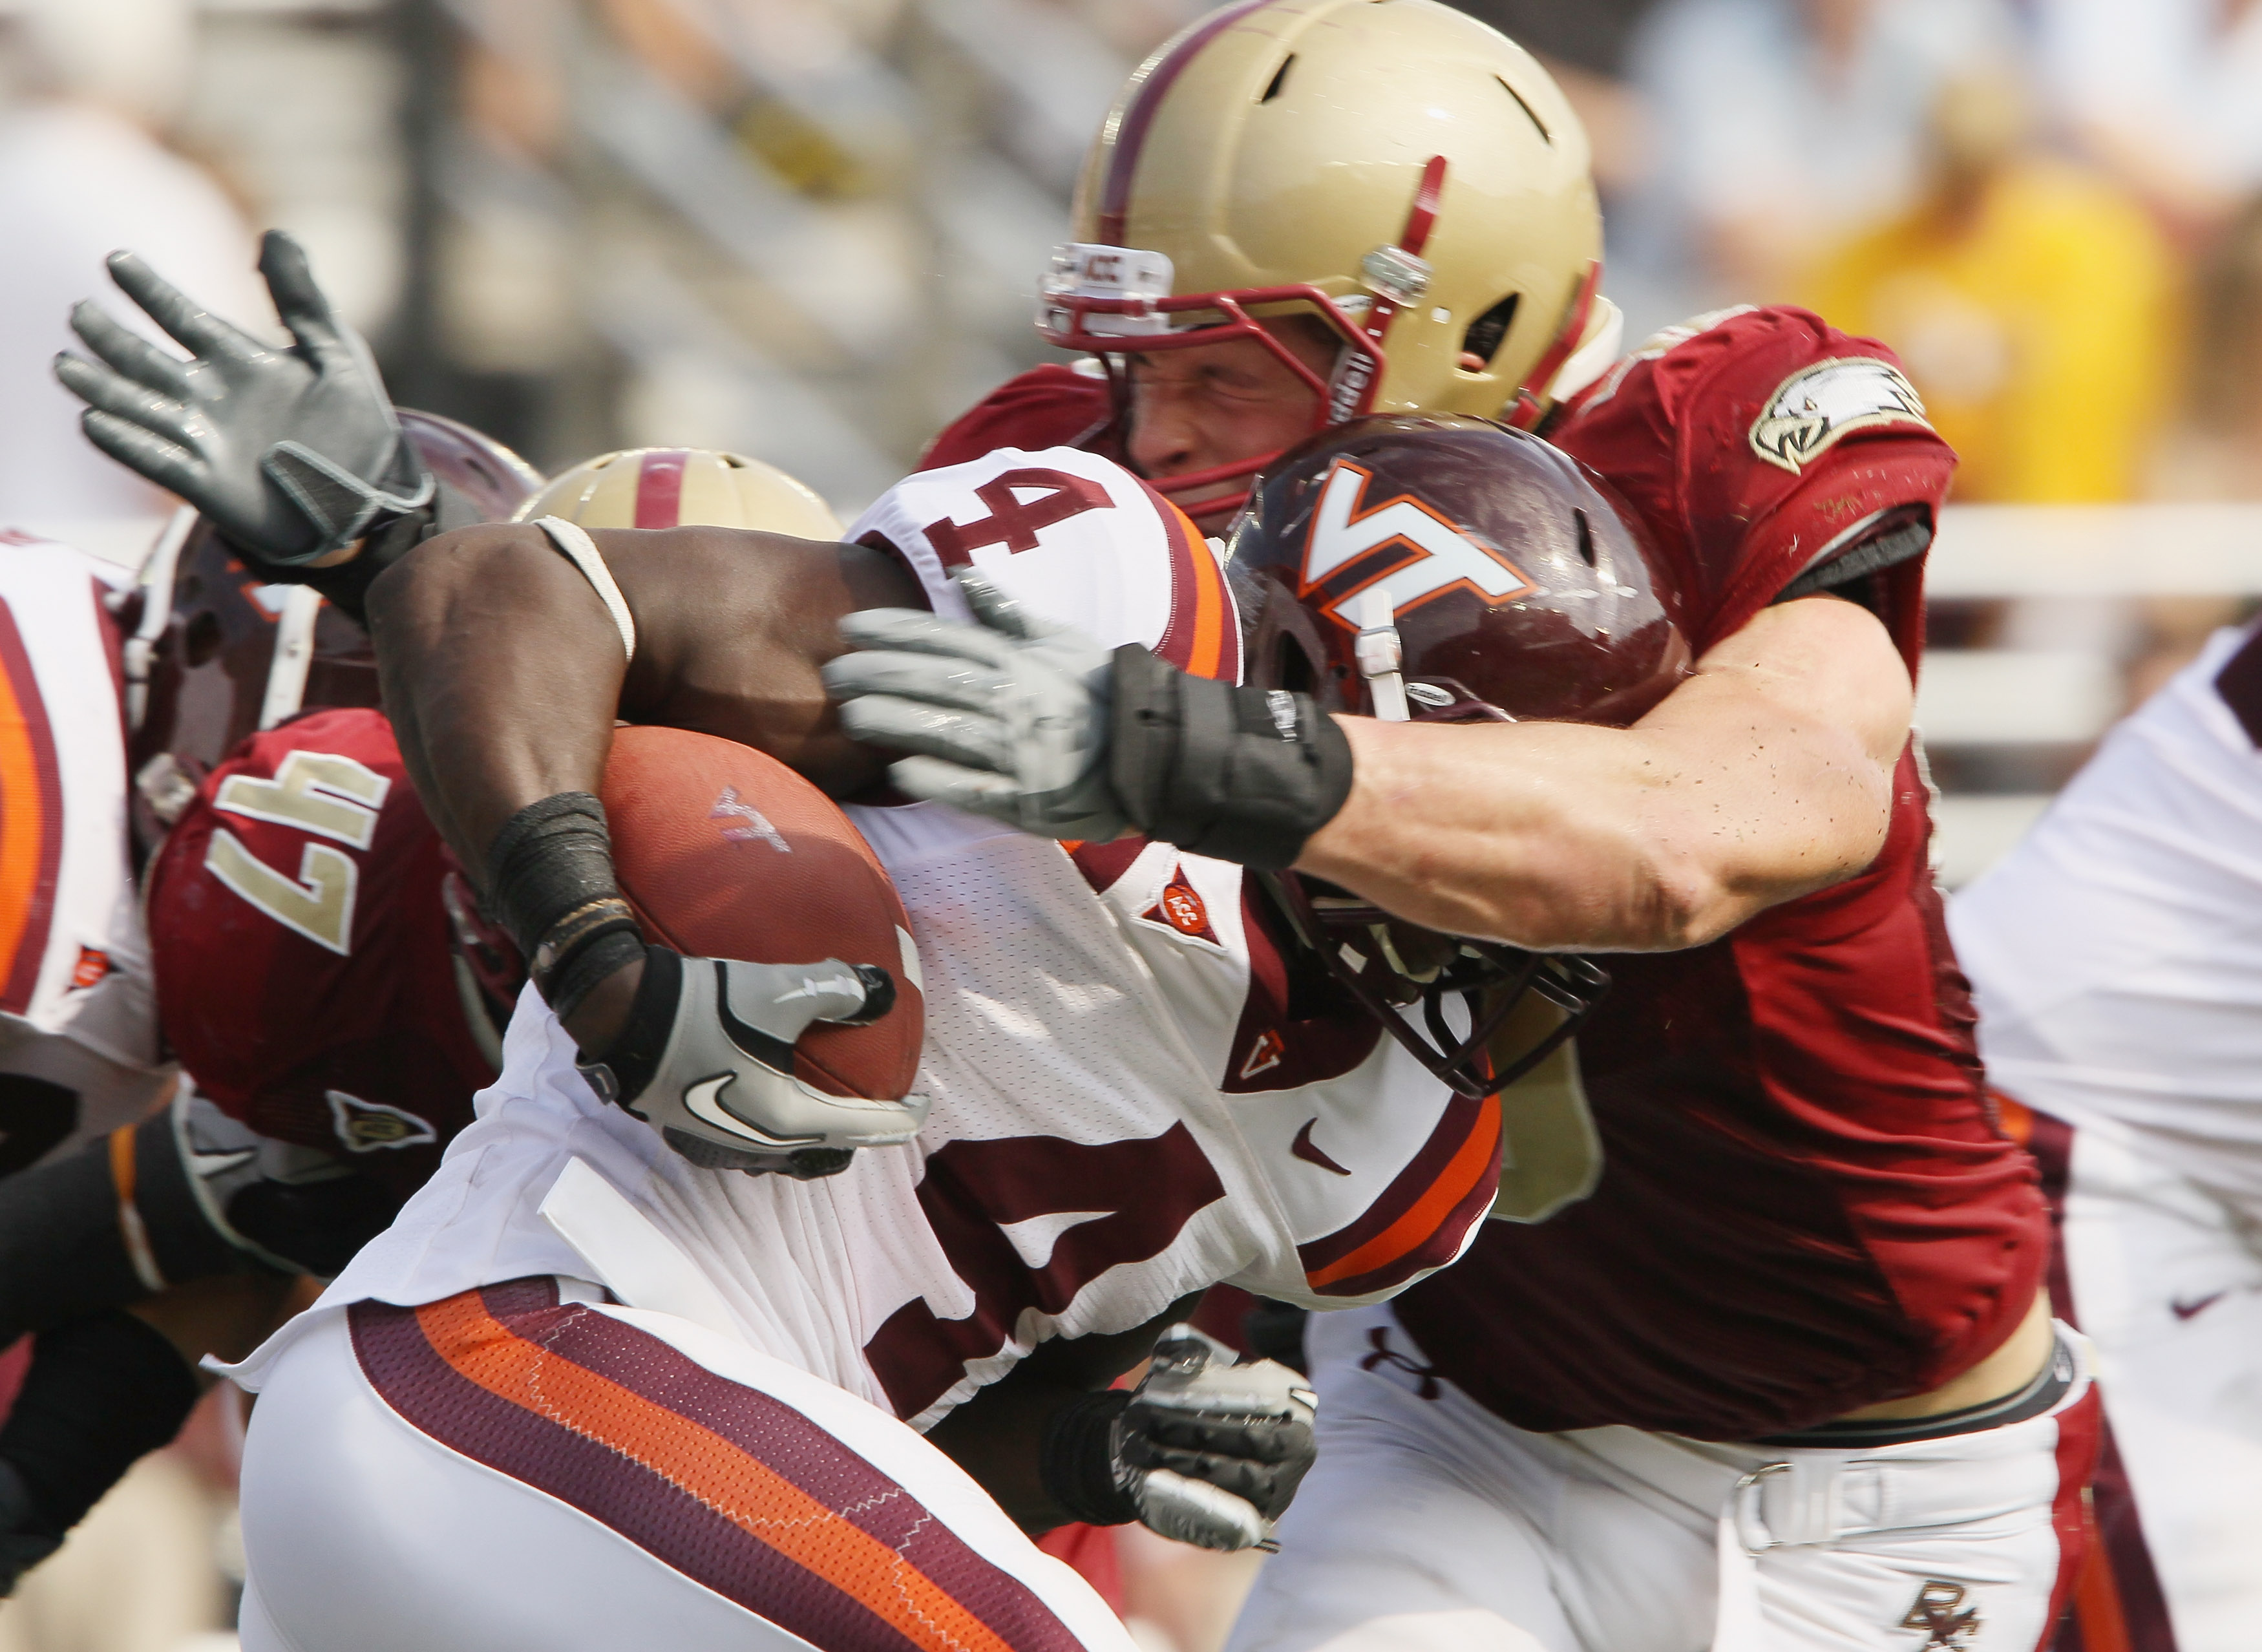 CHESTNUT HILL, MA - SEPTEMBER 25:  Alex Albright #98 of the Boston College Eagles tackles David Wilson #3 of the Virginia Tech Hokies on September 25, 2010 at Alumni Stadium in Chestnut Hill, Massachusetts. Virginia Tech defeated Boston College 19-0.  (Ph